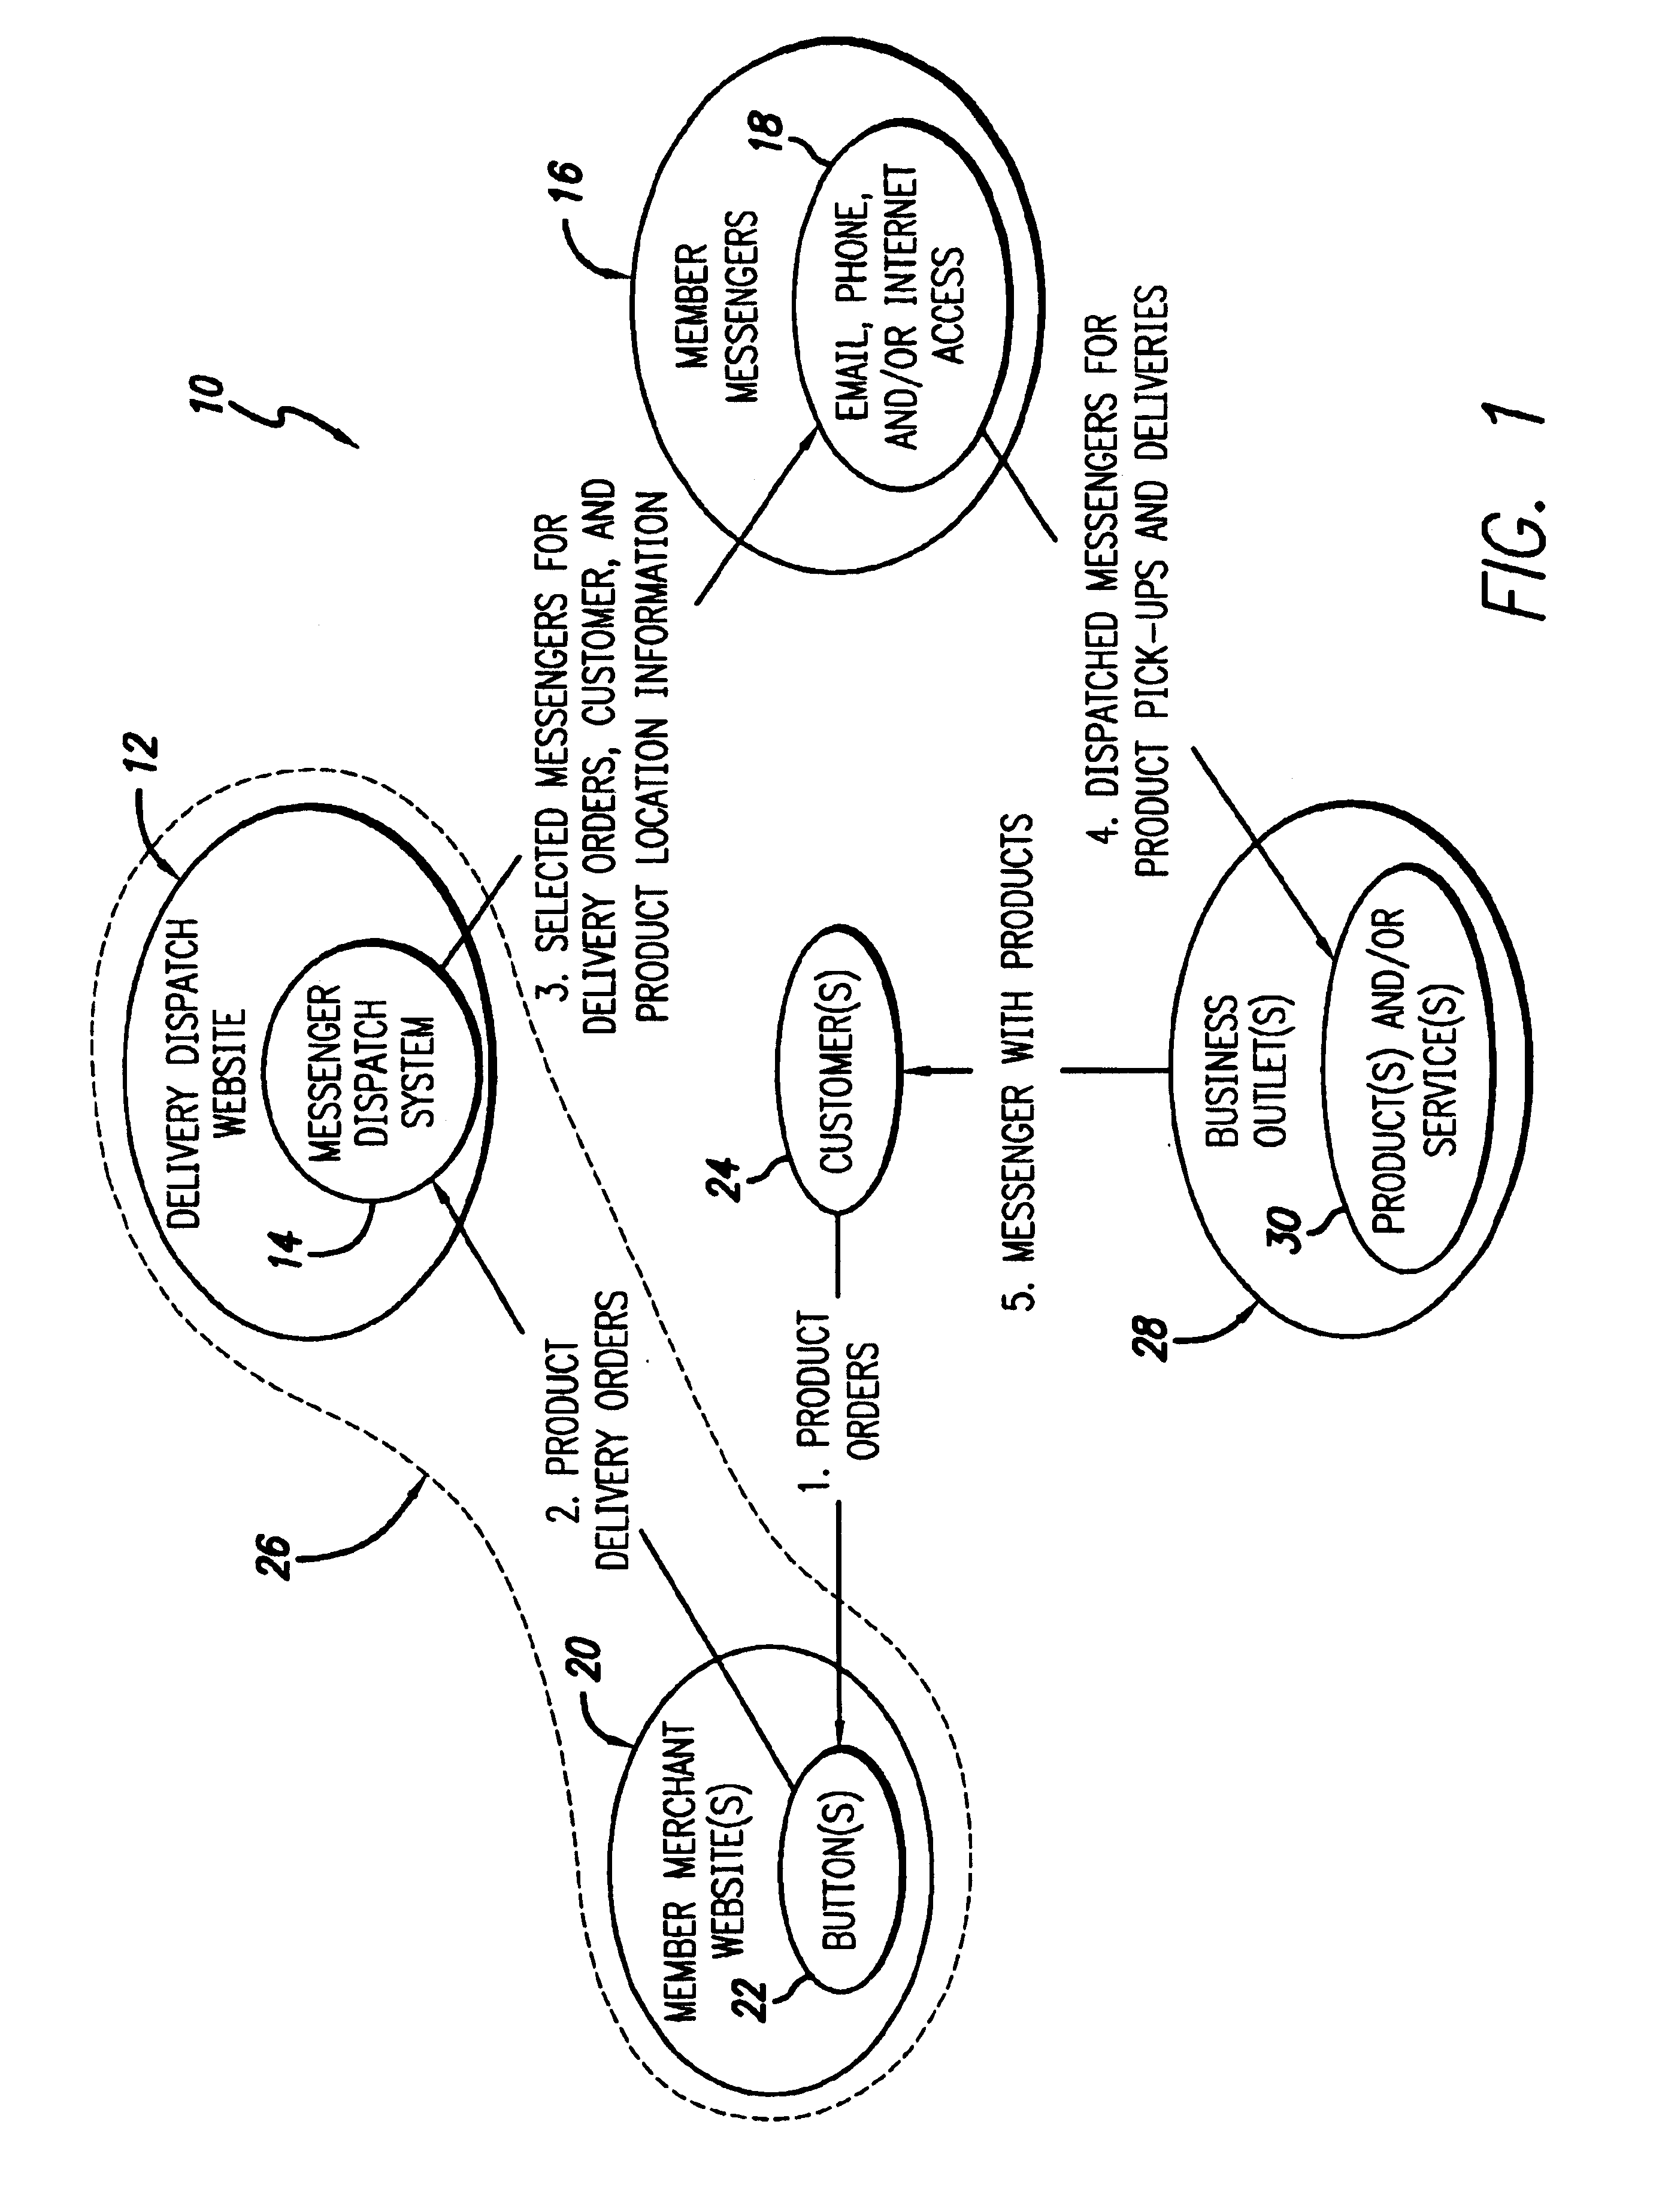 System and method for facilitating interaction between businesses, delivery agents, and customers